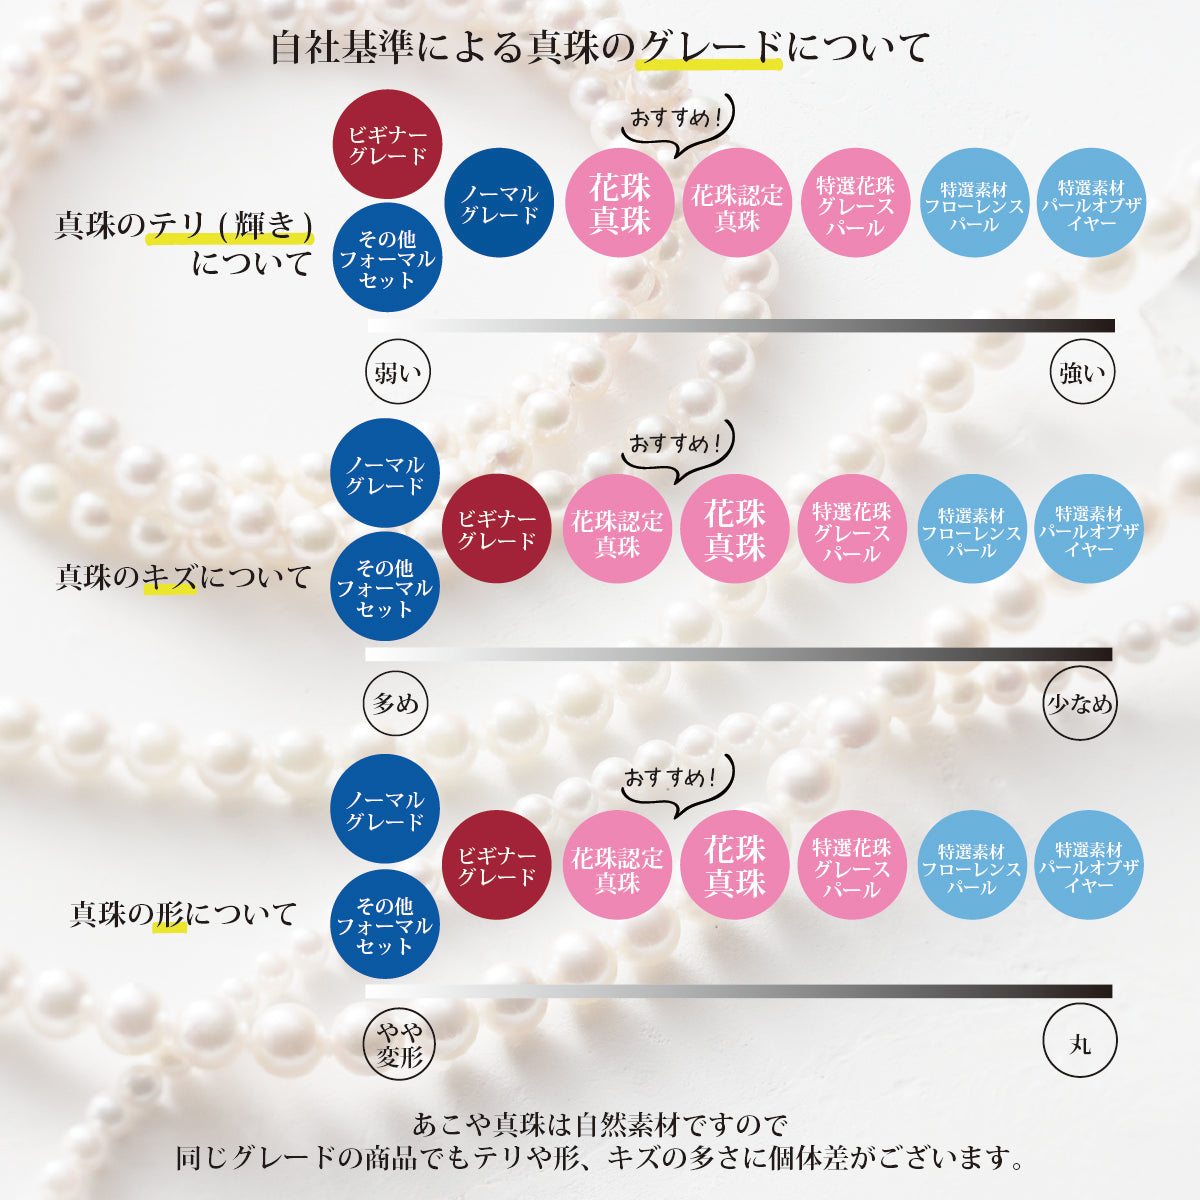 [Hanadama Certified Pearls] Formal Necklace Set of 2 [8.0-8.5mm] (Earrings included) Akoya Pearls with storage case [New Japan Pearl Research Institute Certificate of Authenticity]